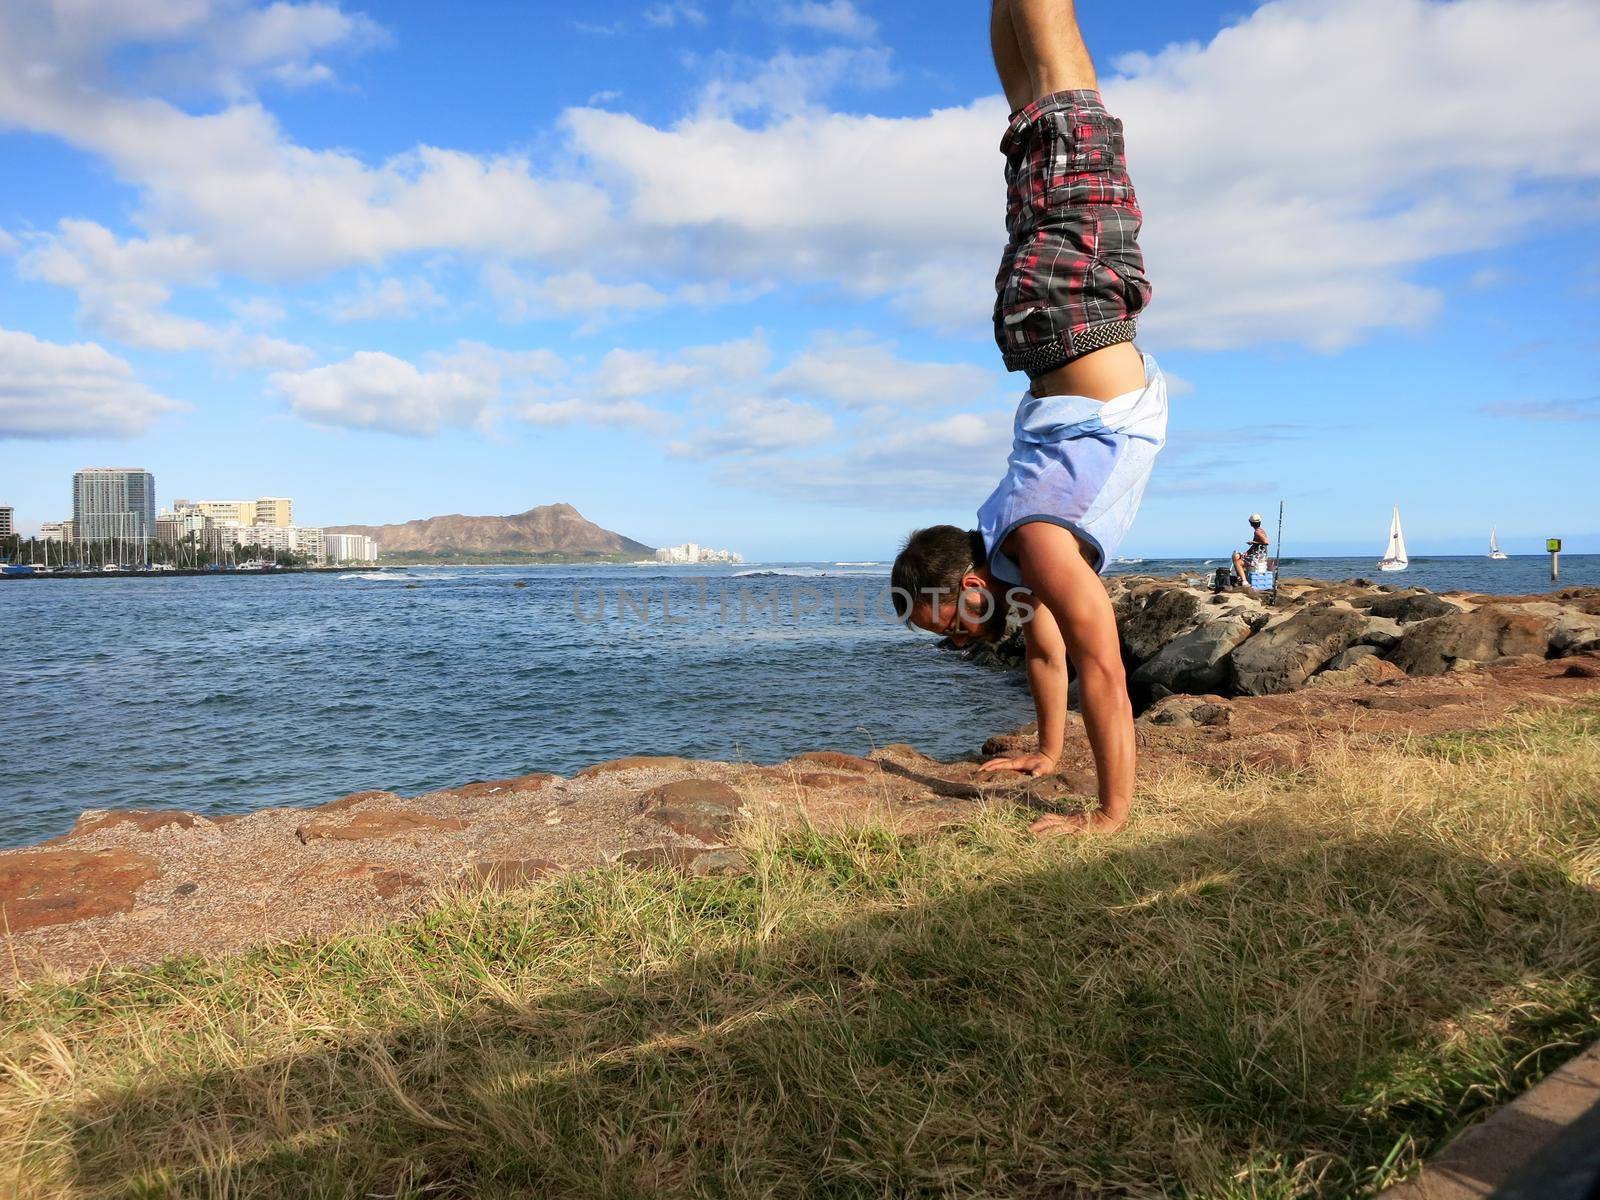 Man does Handstand along shore of Magic Island  by EricGBVD